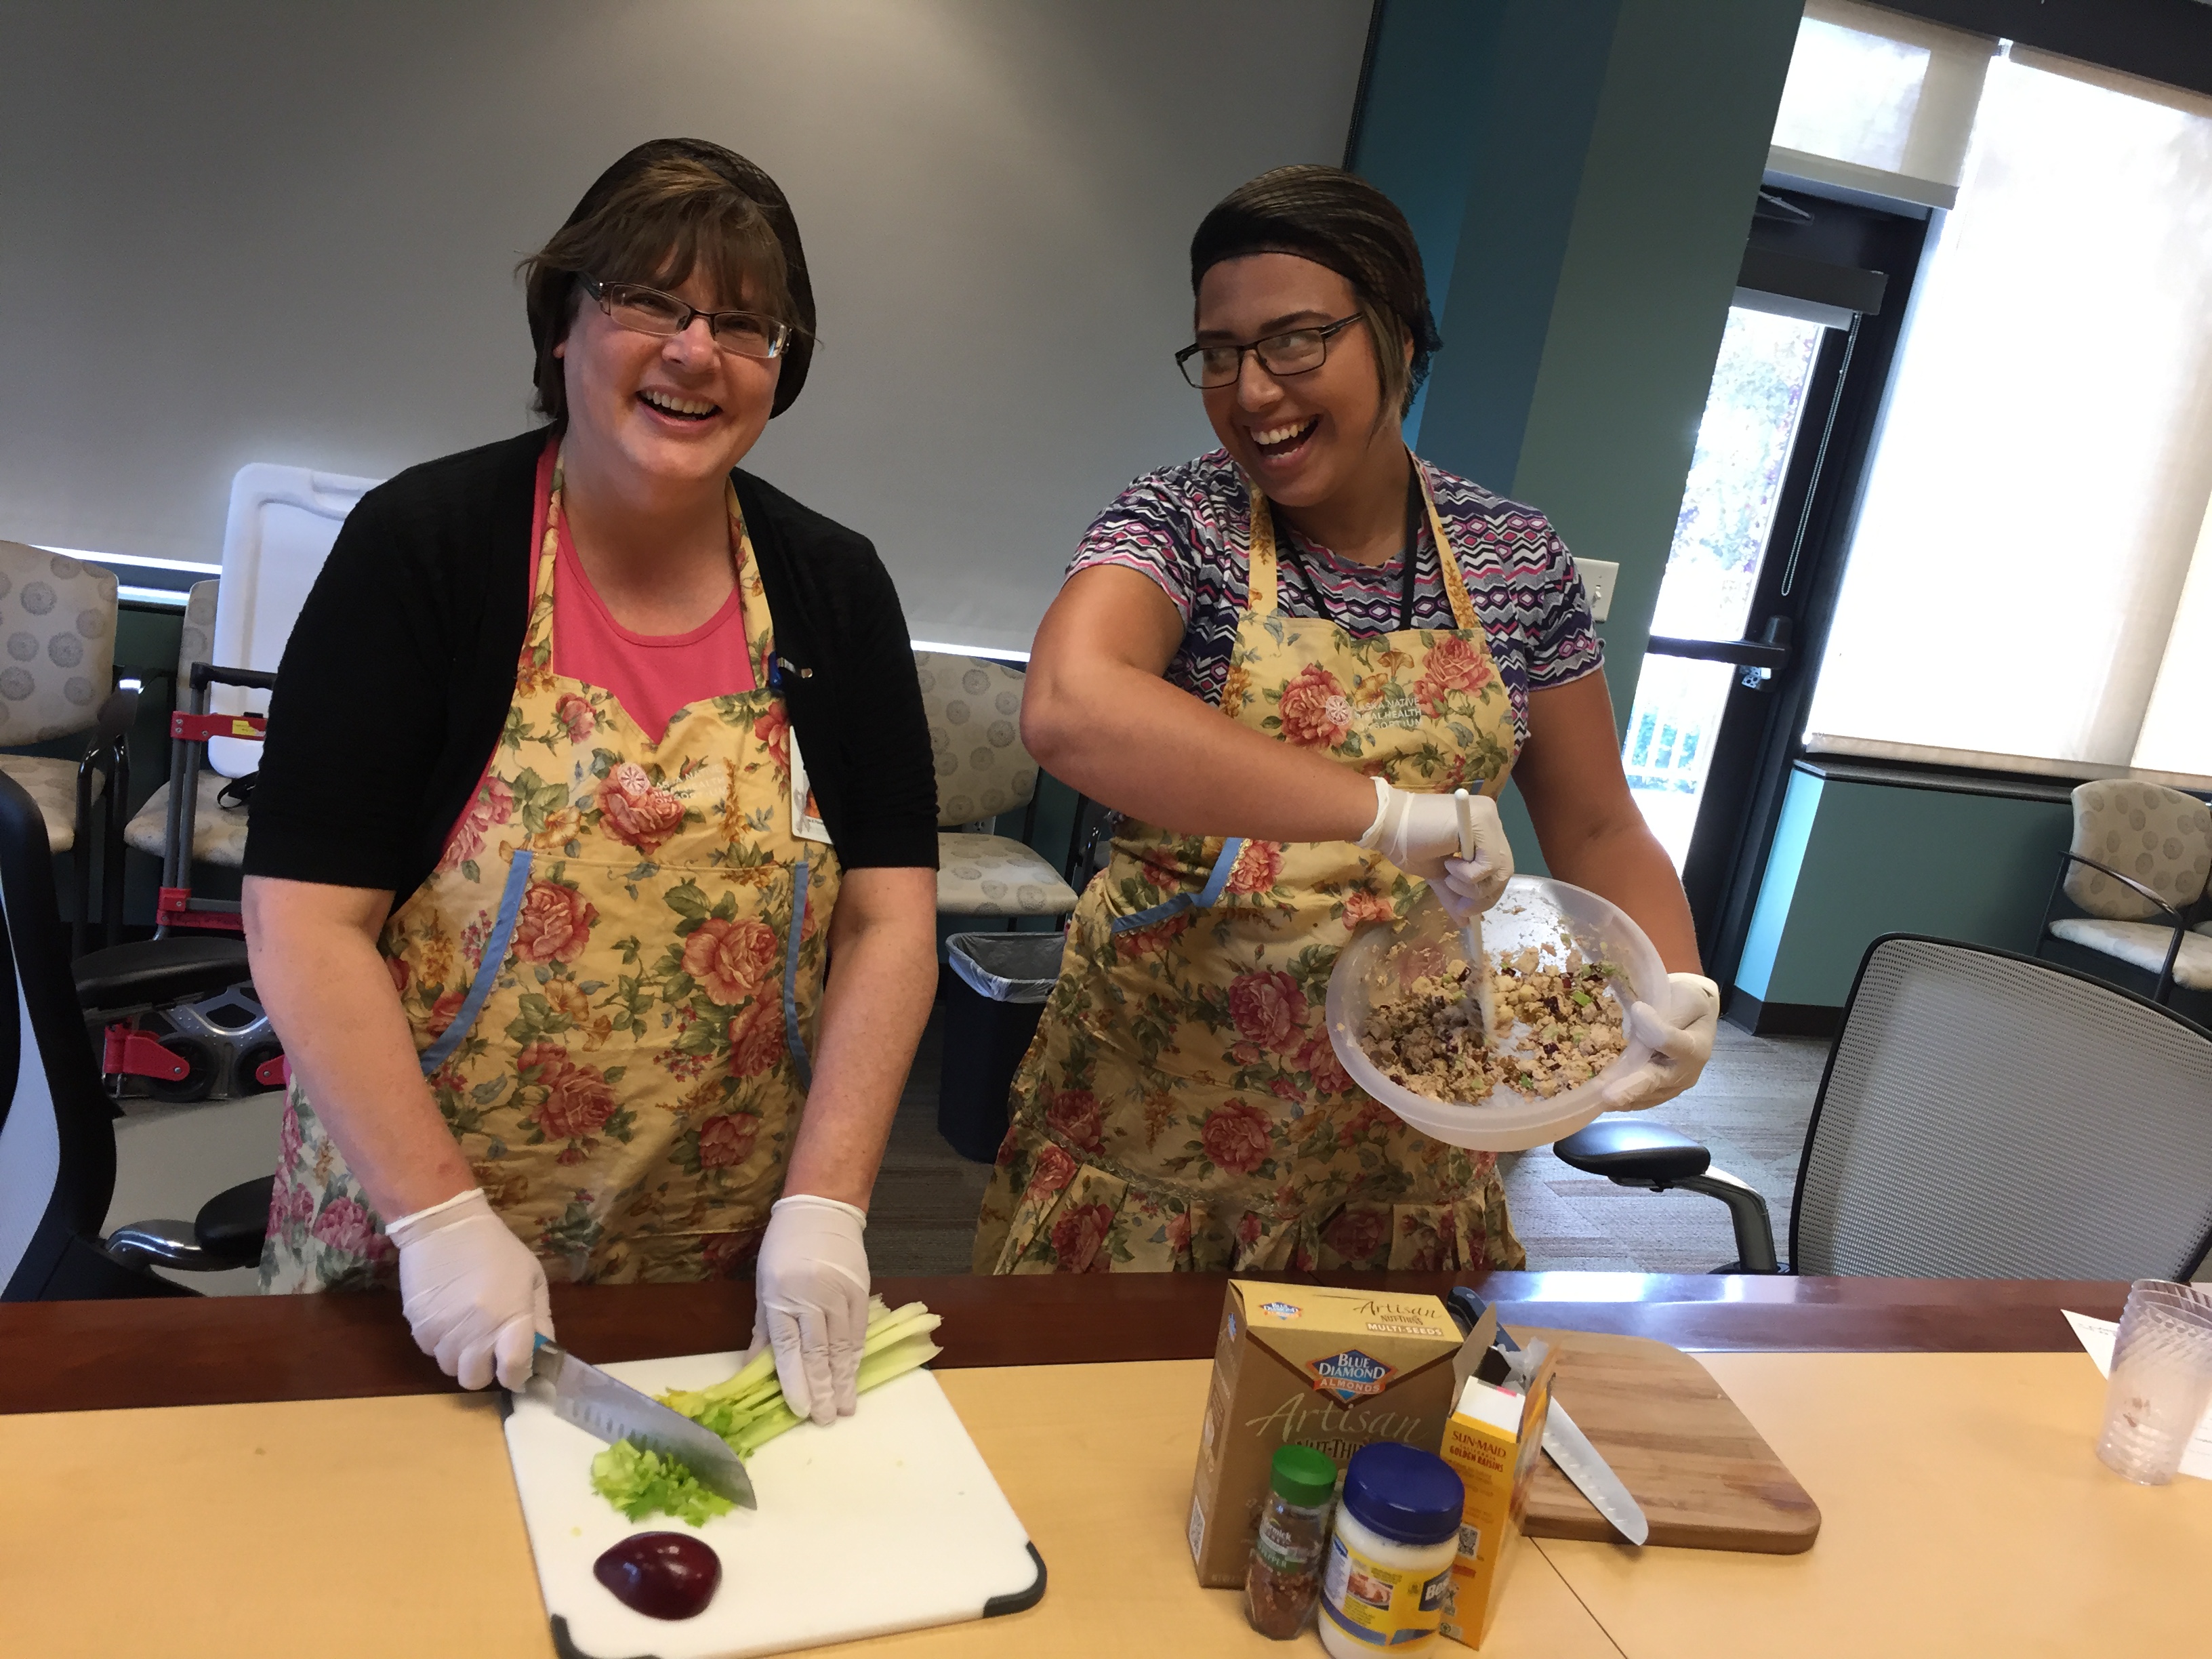 Marcia Anderson, left, and Karolyn Ceron demonstrate how to make fruity salmon salad at the Alaska Native Tribal Health Consortium. (Photo by Anne Hillman/Alaska Public Media)